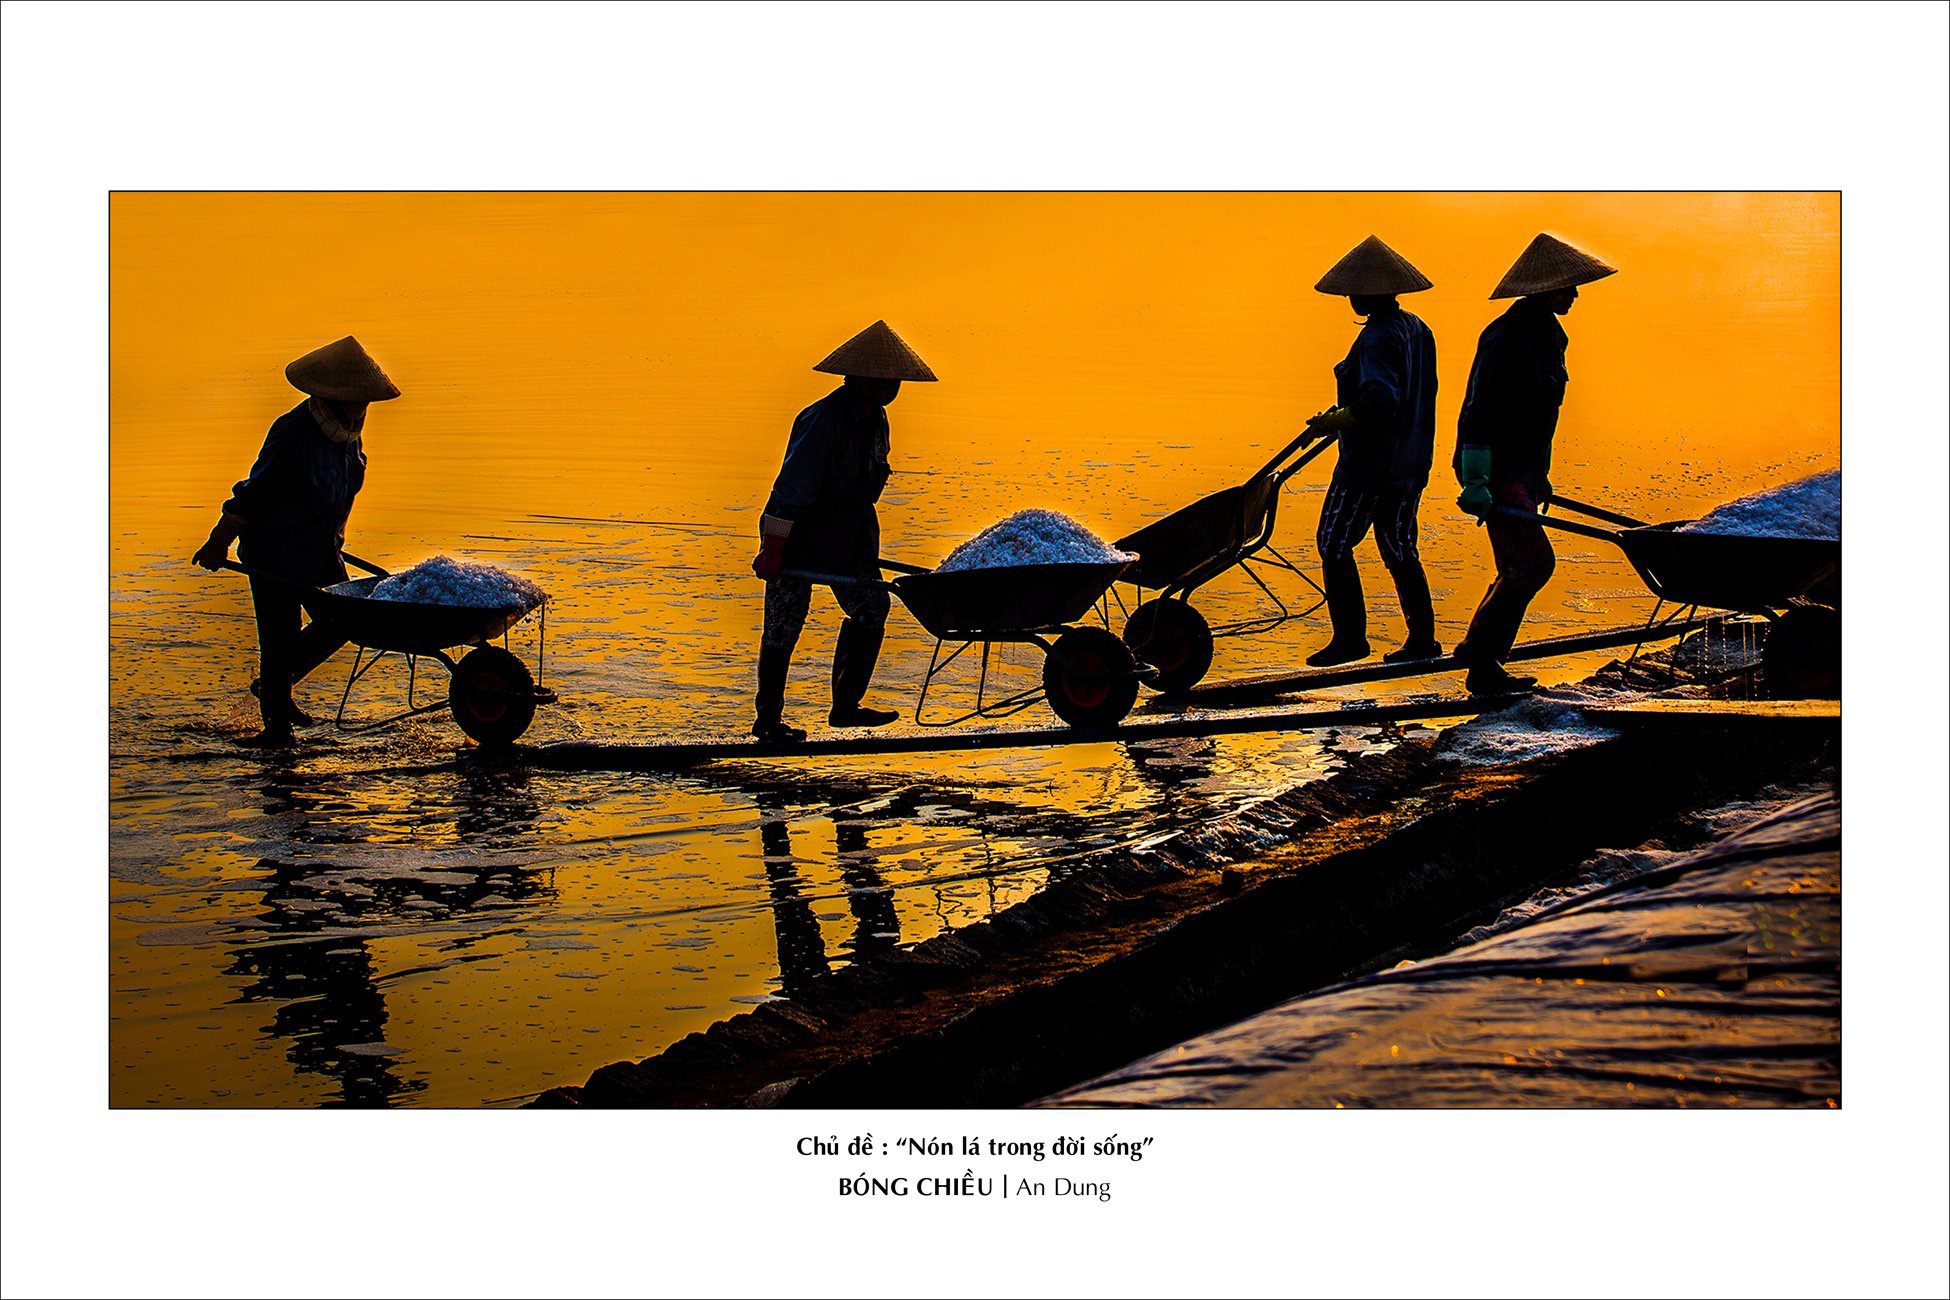 Women wearing ‘non la’ collect salt in this photo on display at the Ho Chi Minh City Photography Association (HOPA) headquarters.